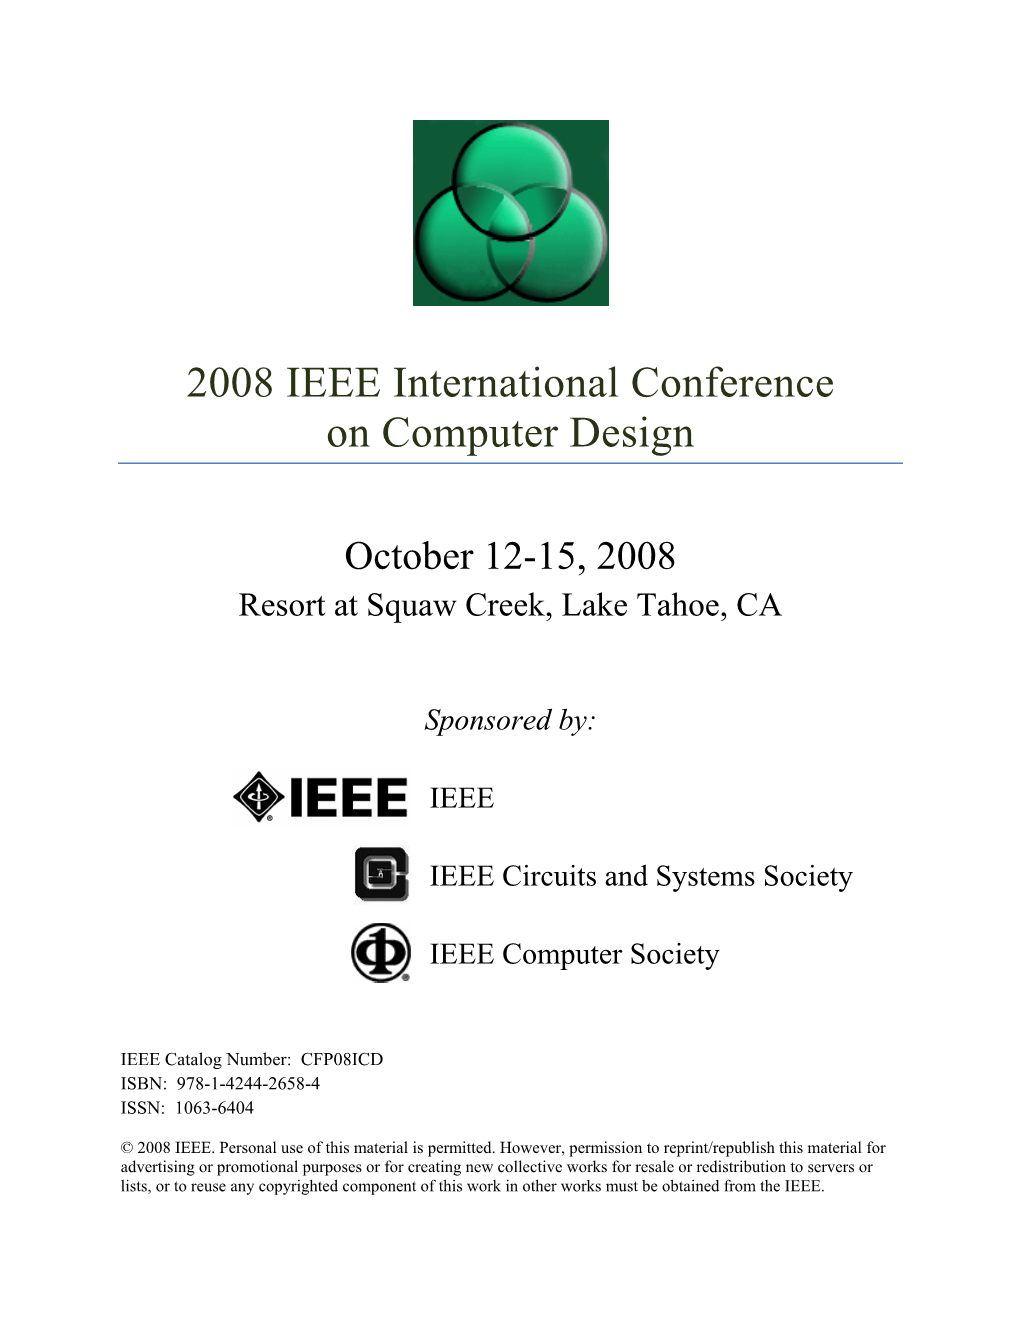 2008 IEEE International Conference on Computer Design